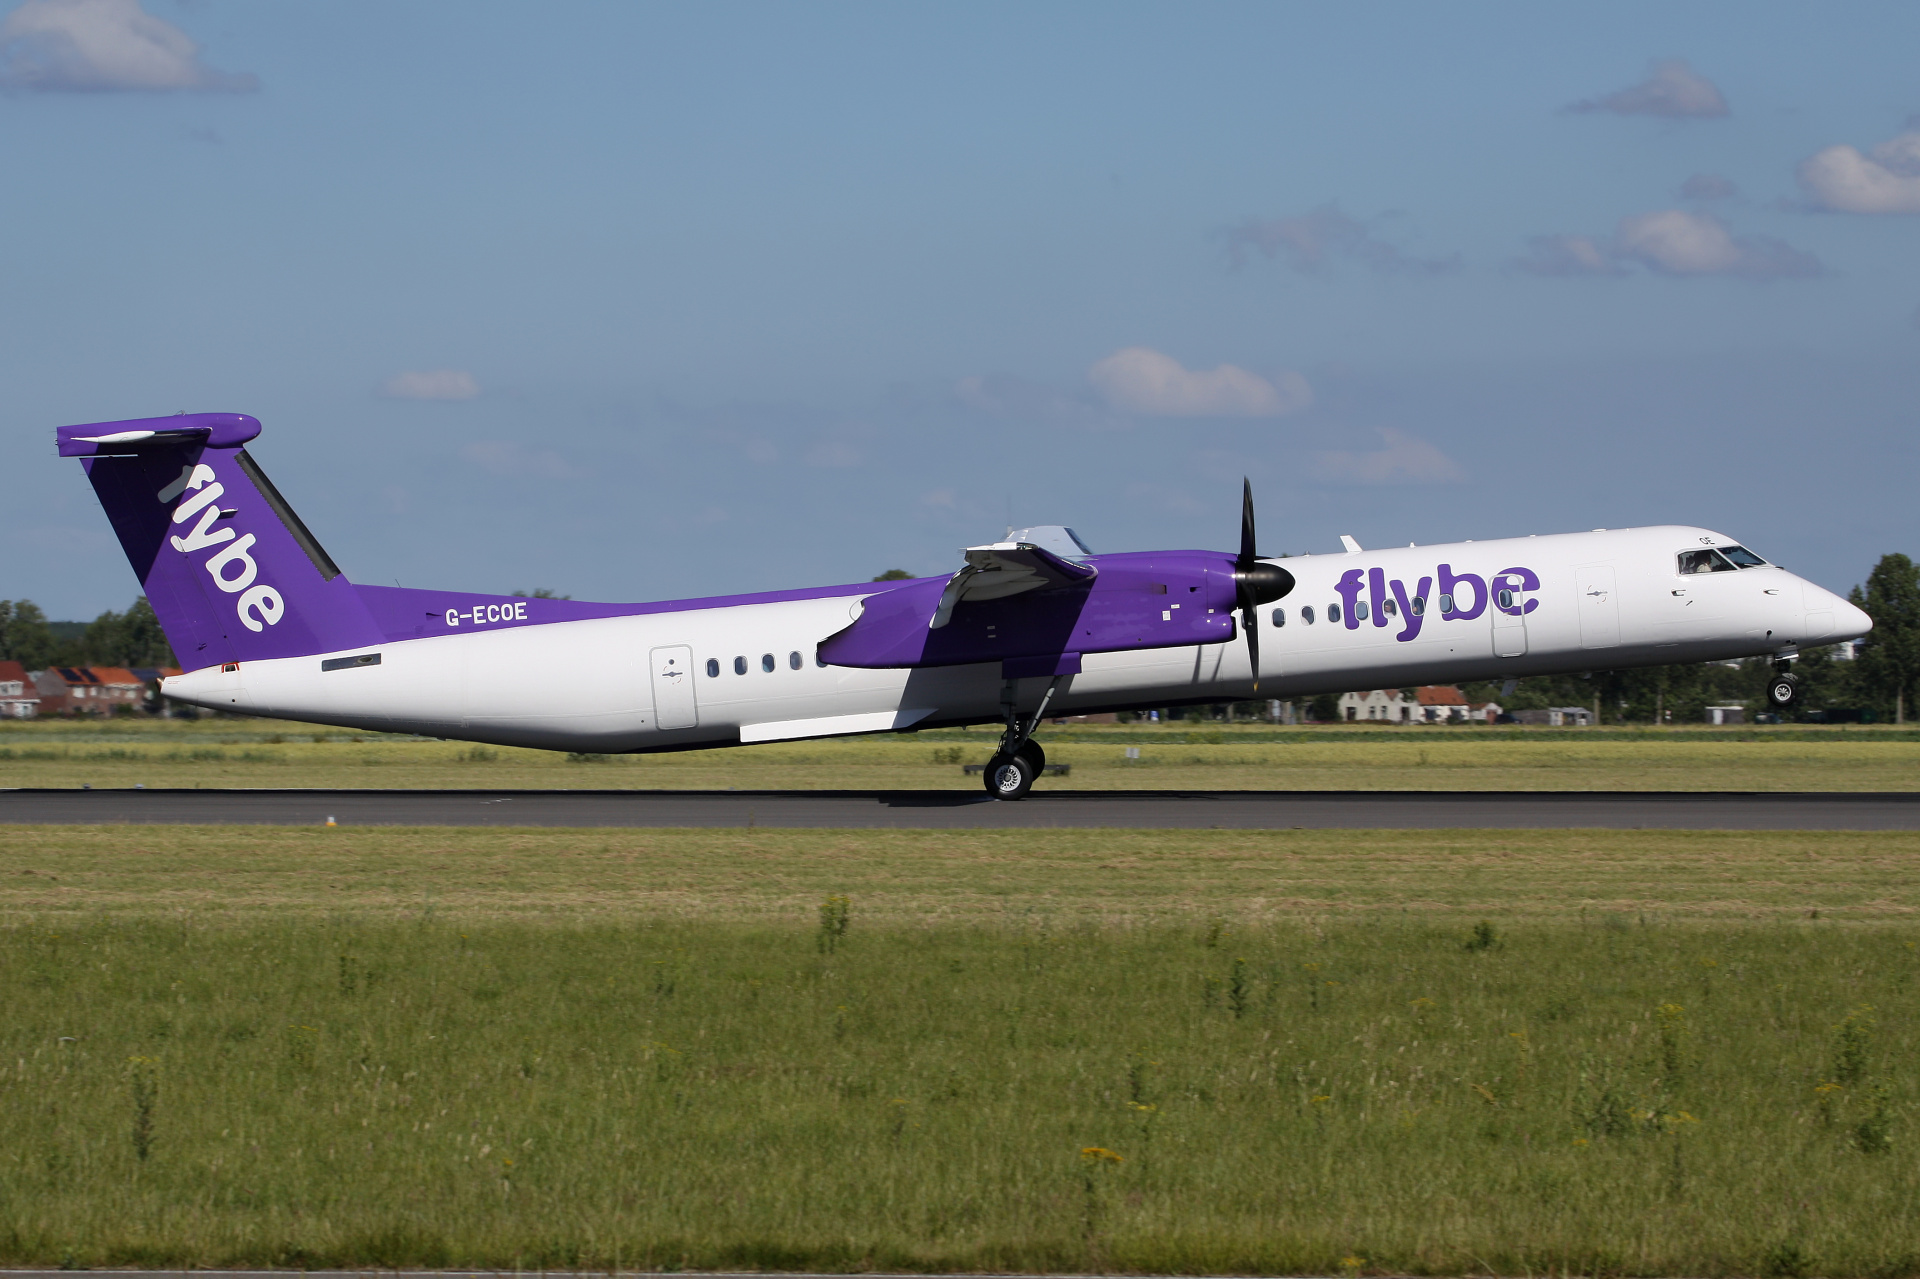 G-ECOE (Aircraft » Schiphol Spotting » Bombardier Q400 Dash 8 » FlyBe)